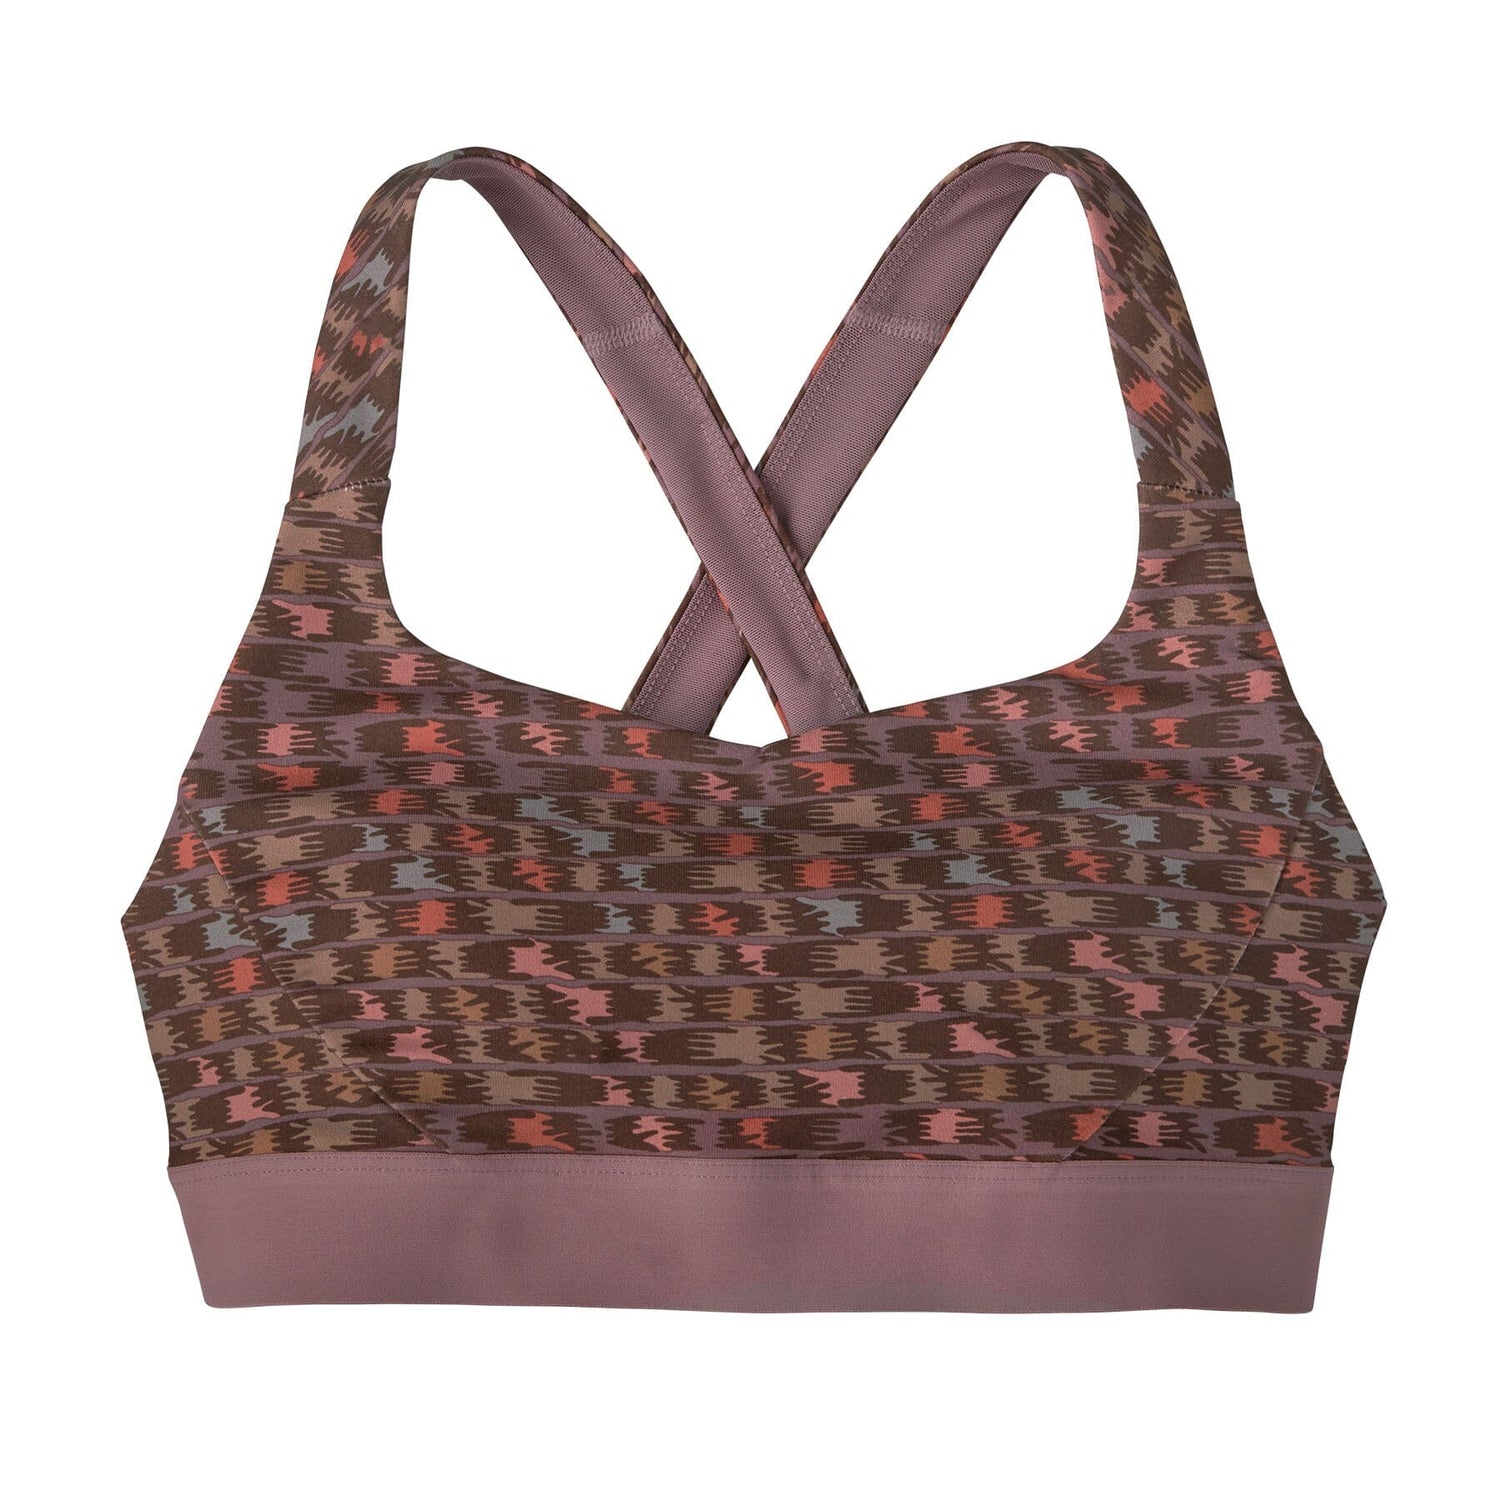 Patagonia Switchback Sports Bra - Recycled Polyester Intertwined Hands: Evening Mauve Underwear